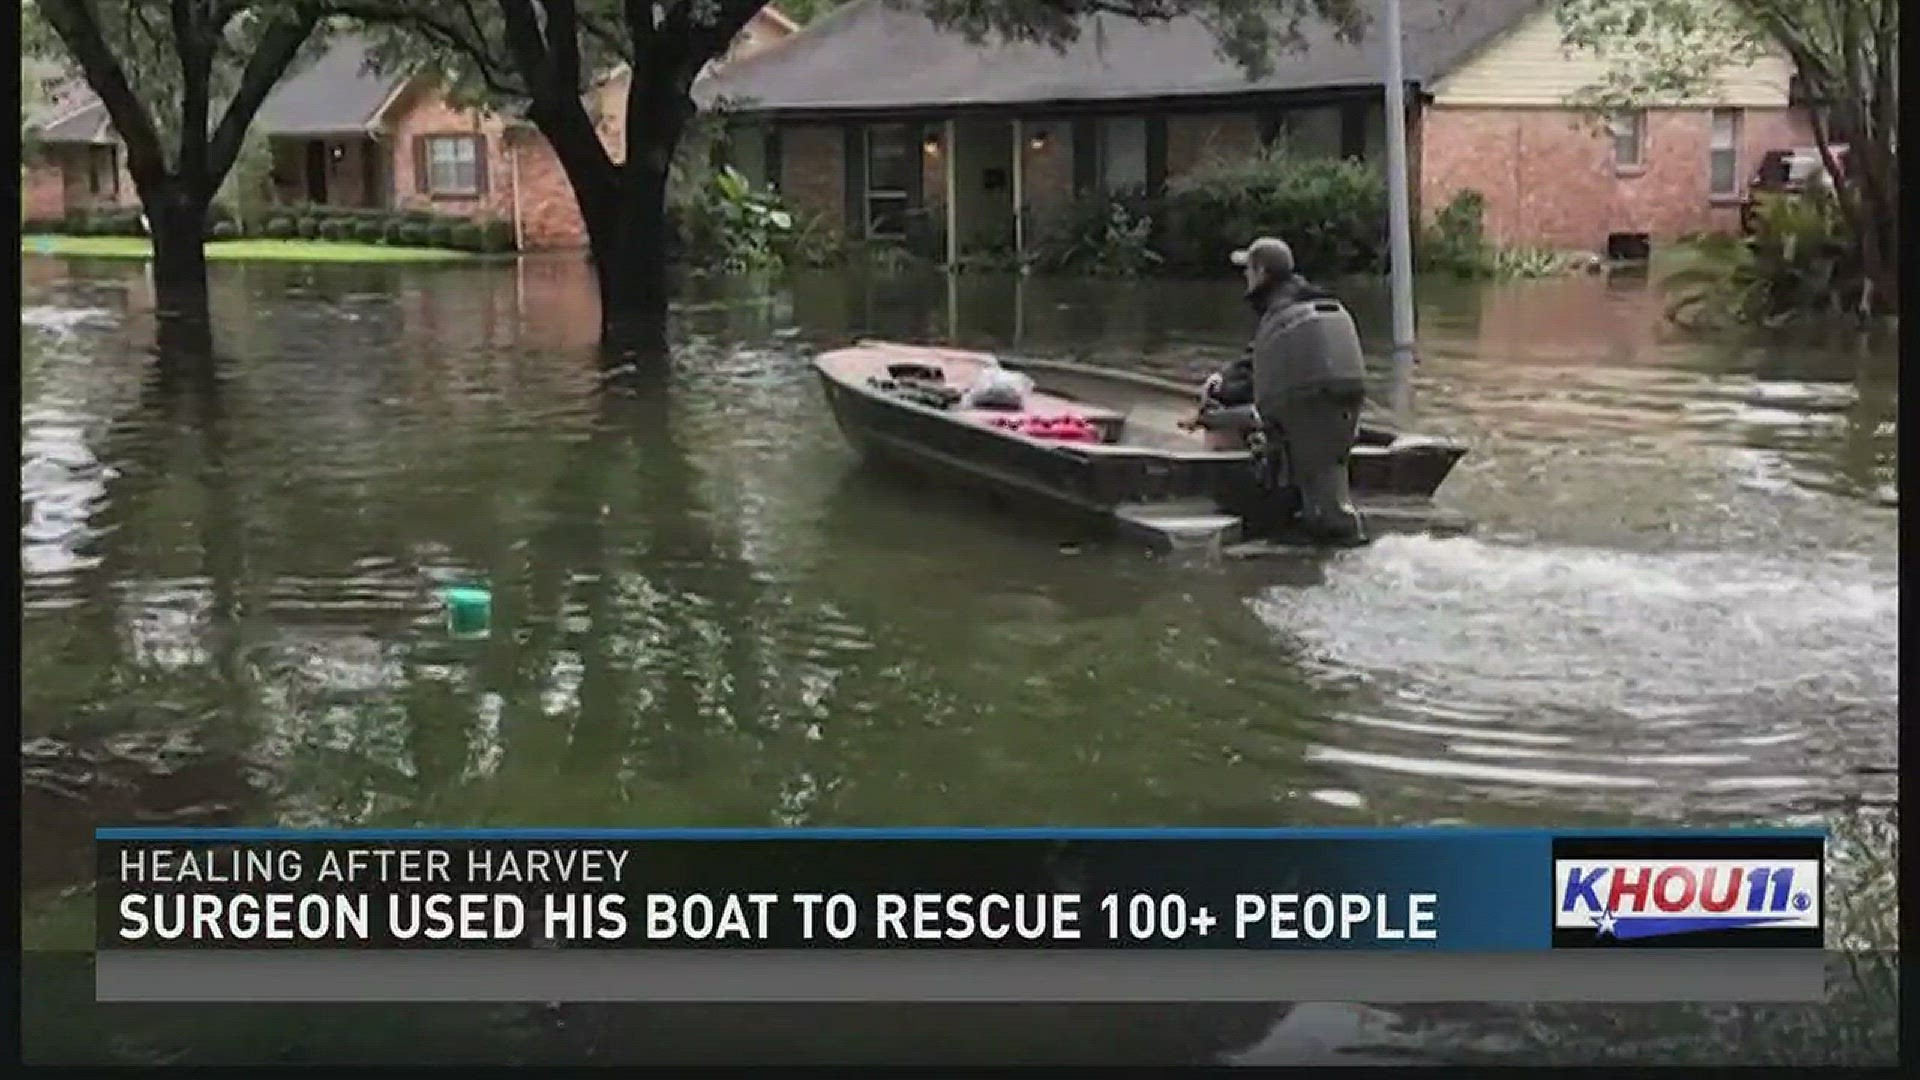 After he saved more than 100 people using a fishing boat in floodwaters during Hurricane Harvey, one Houston surgeon had to be rescued after his boat his a fire hydrant.